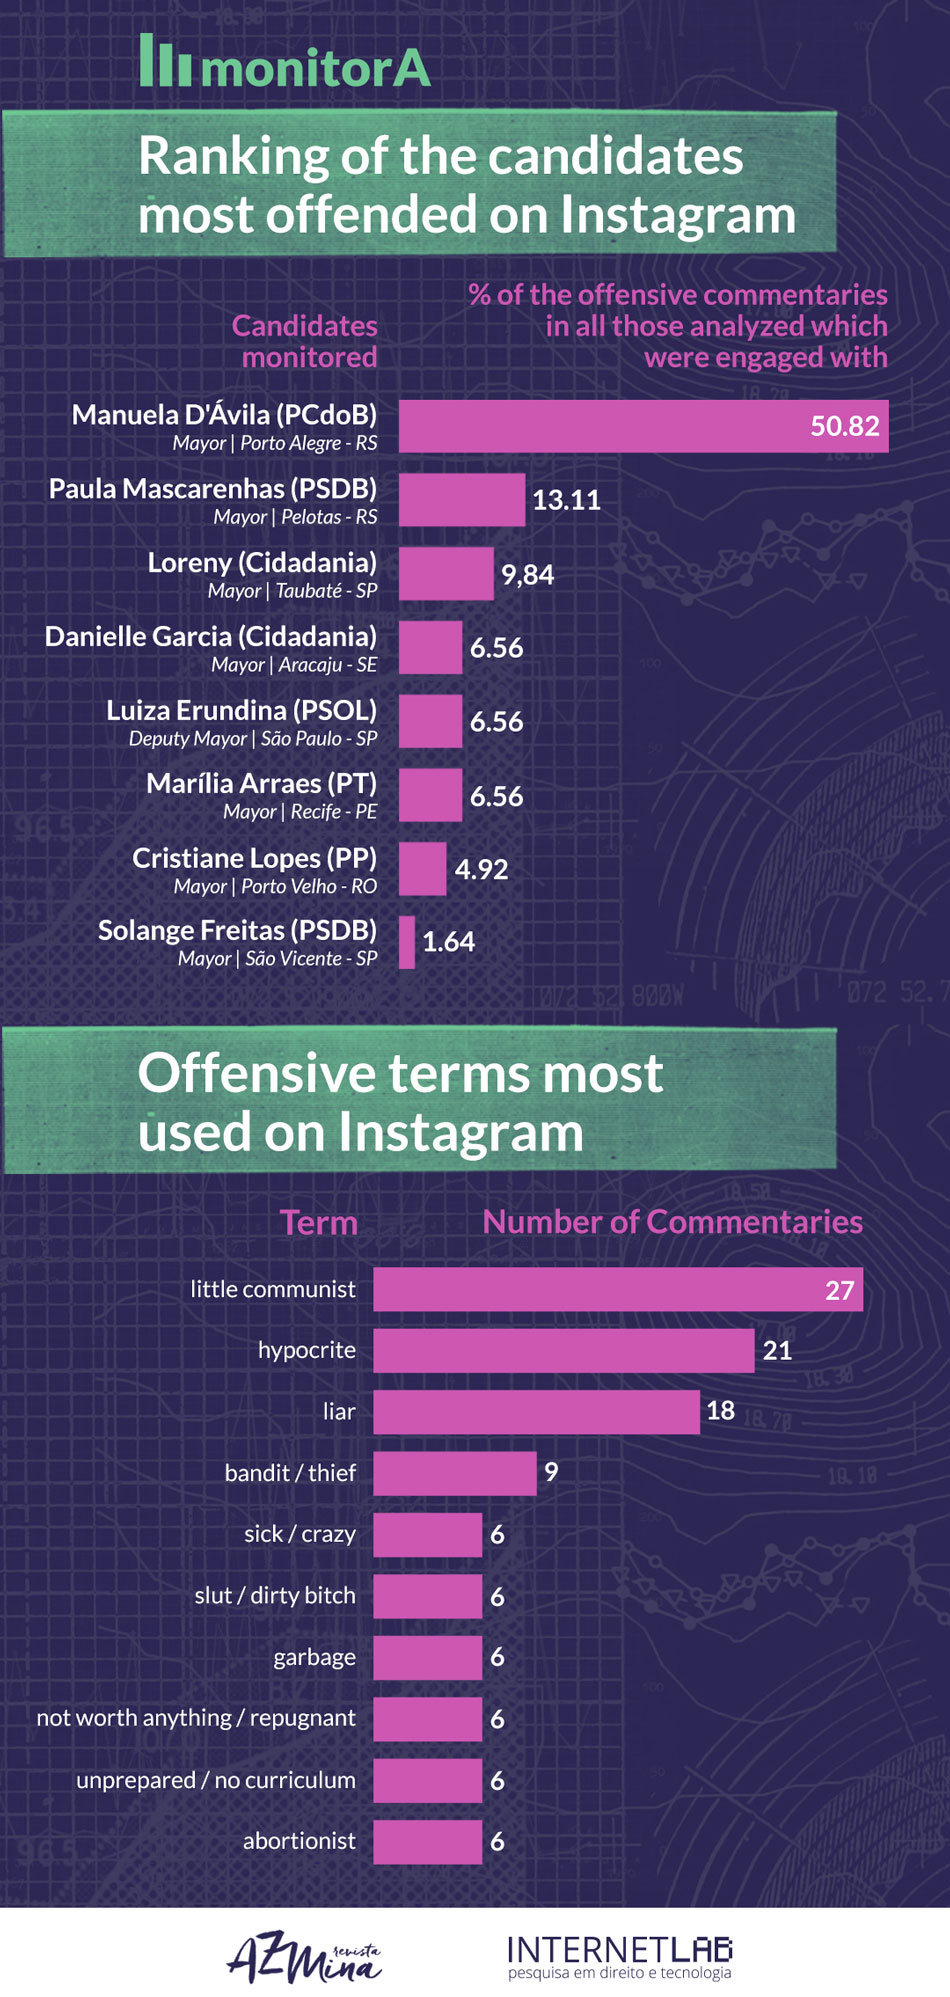 Image of the Monitora project informing the ranking of the most offended candidates on instagram. Among them are Manuela D'ávila, Paula Mascarenhas, Loreny, Danielle Garcia, Luiza Erundina, Marília Arraes, Cristiane Lopes and Solange Freitas. It also shows the most commonly used terms to offend on Intagam. Among them, they are communist, hypocrite, liar, bandit/thief, sick/crazy, naughty/slut, garbage, worthless/disgusting, unprepared/no curriculum, abortionist.